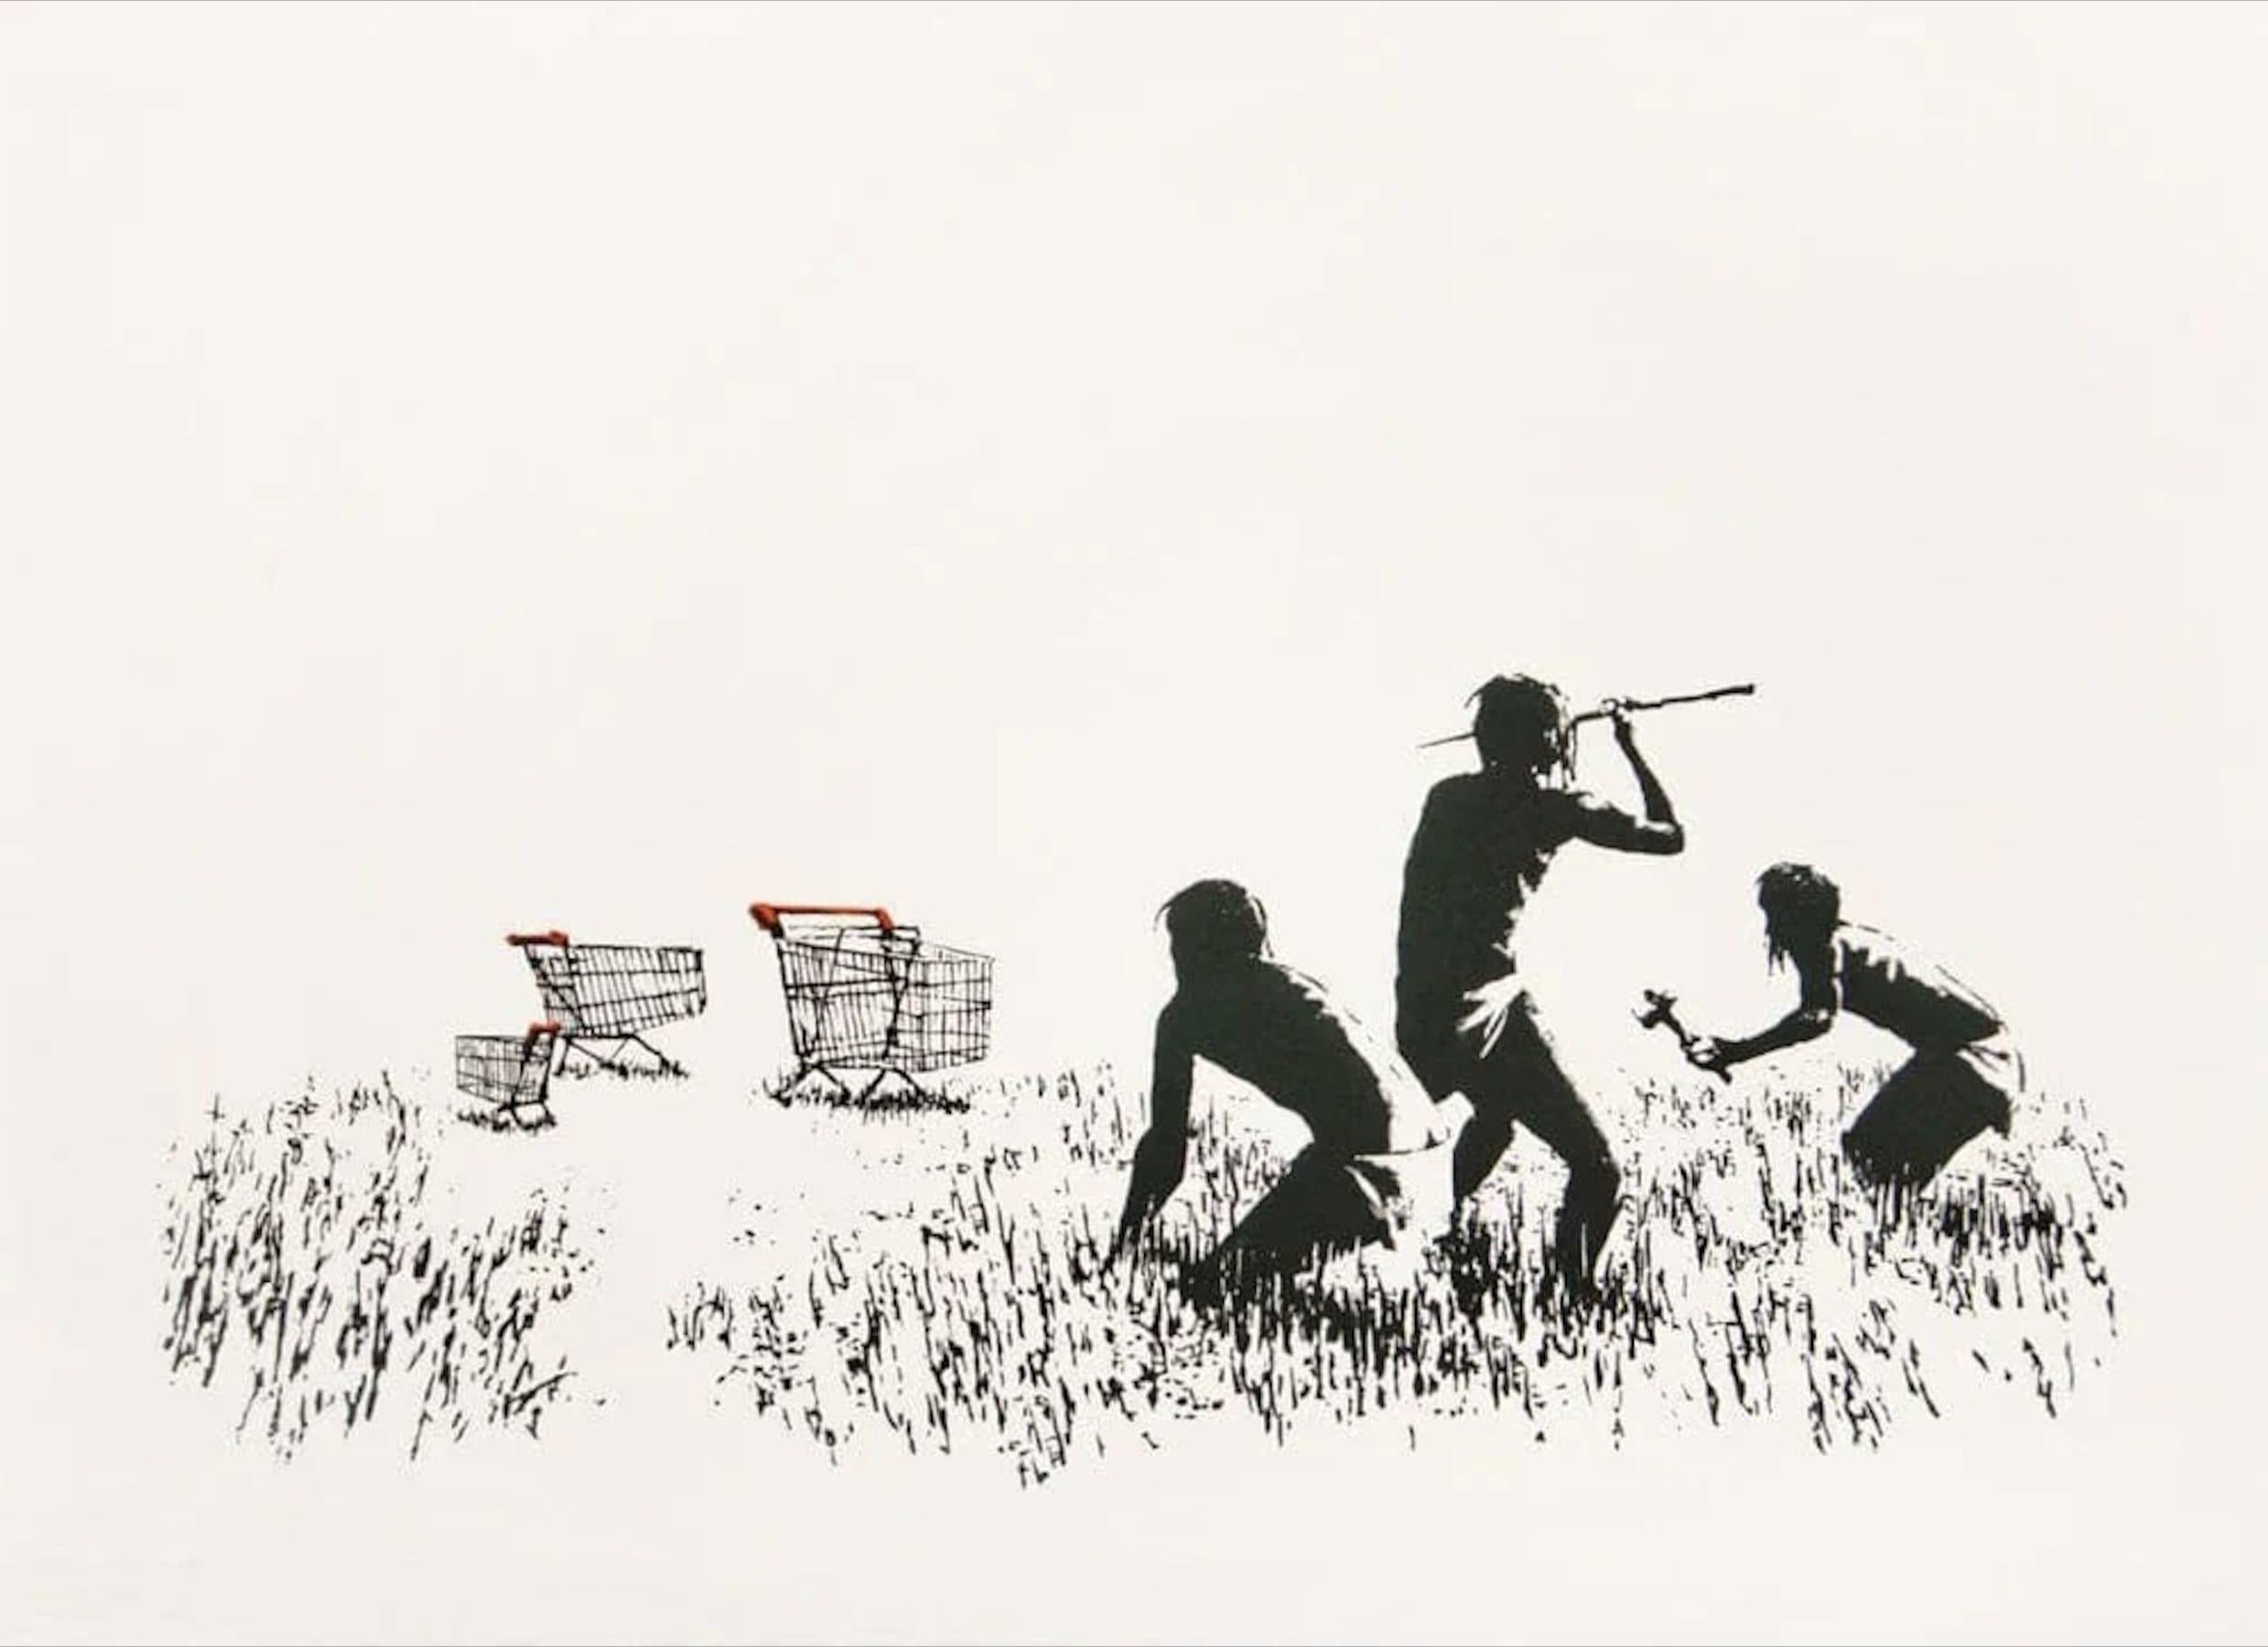 by Banksy 

TROLLEYS (UNSIGNED), 2007
Screen print in colours
29 7/8 x 22 in
76 x 56 cm
Edition of 500